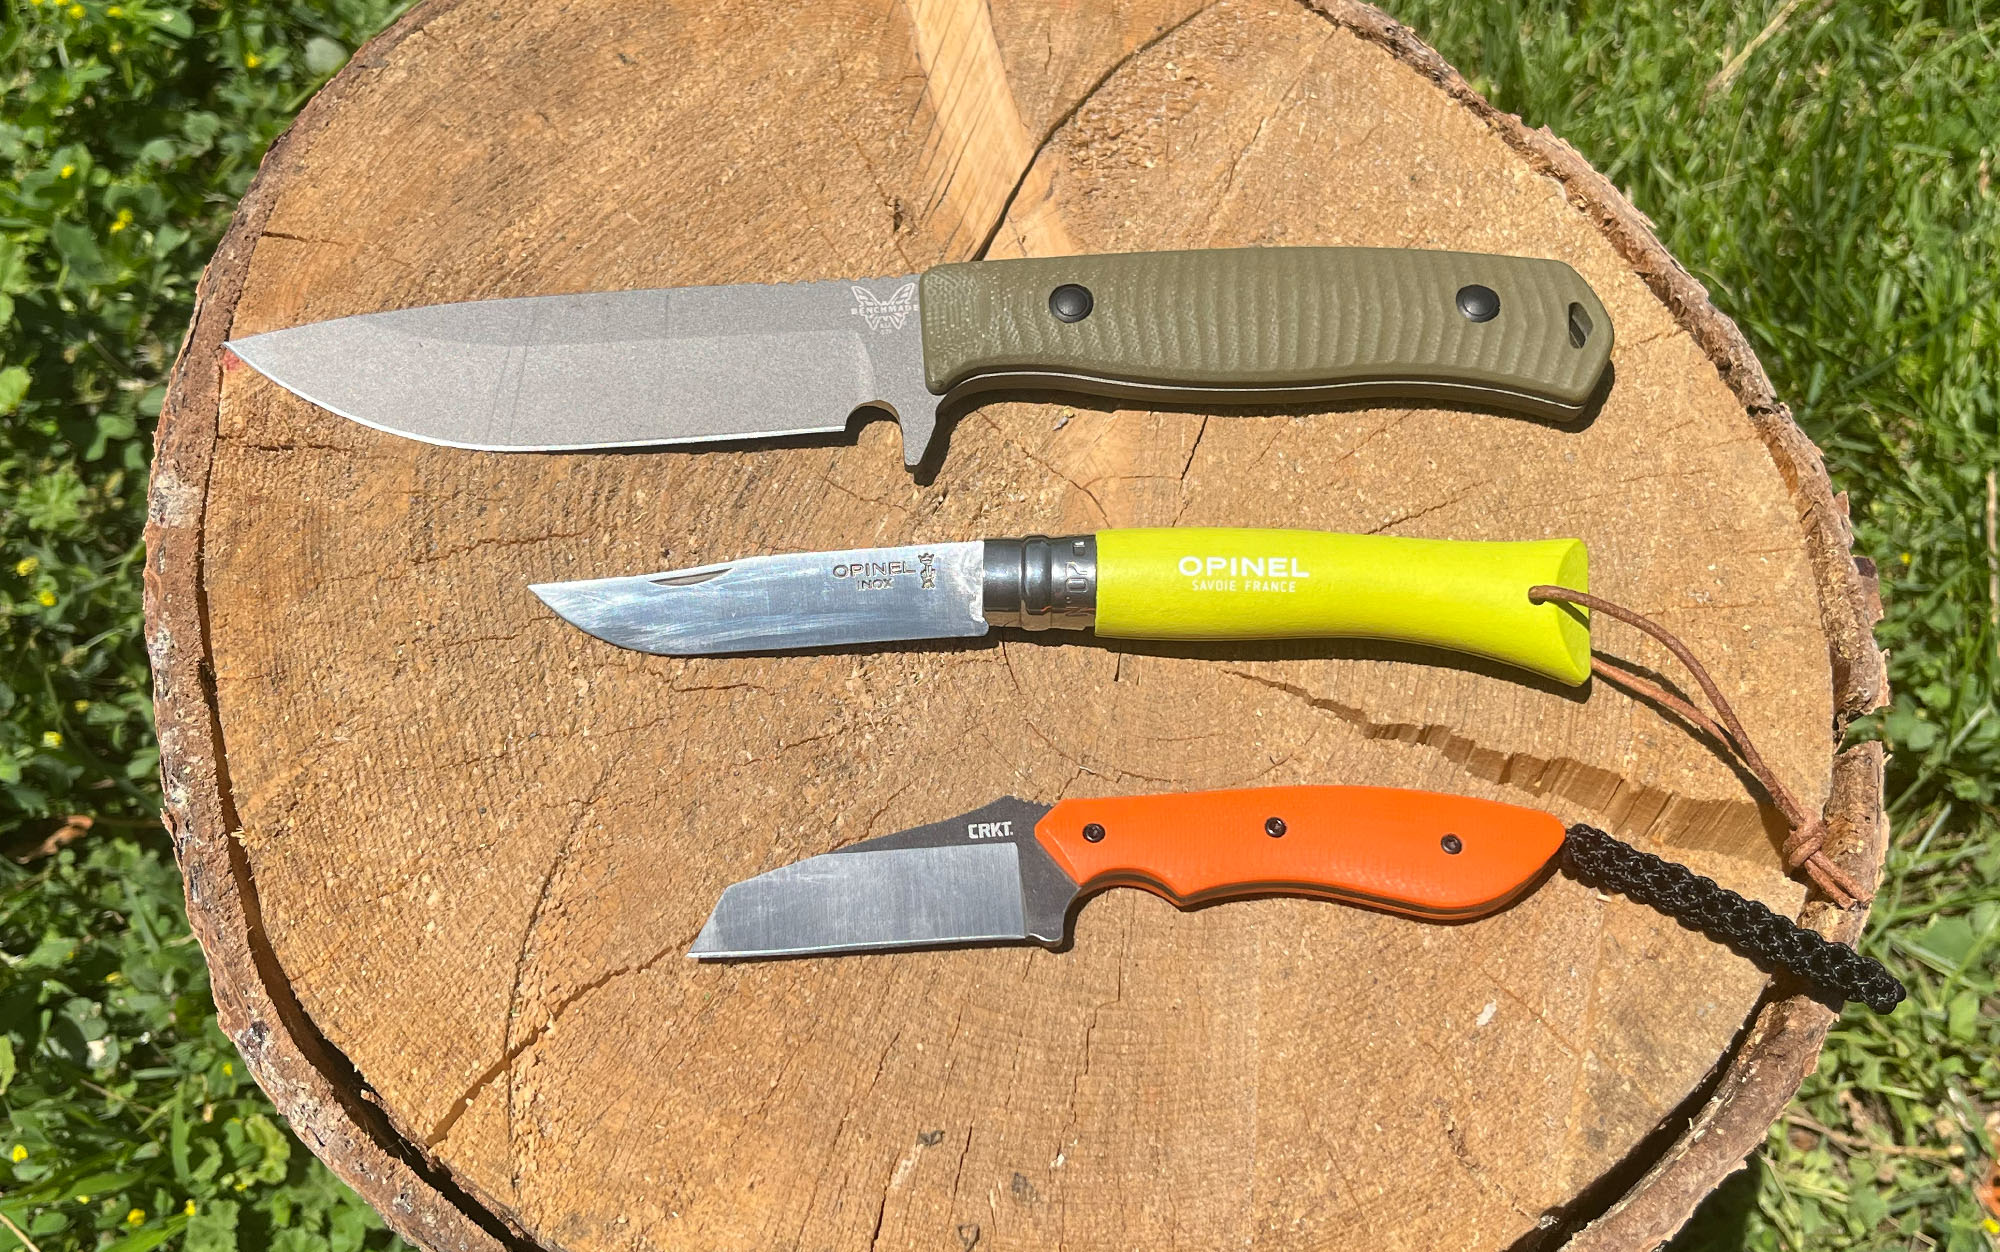 Three knives of varying blade lengths sit on a log.